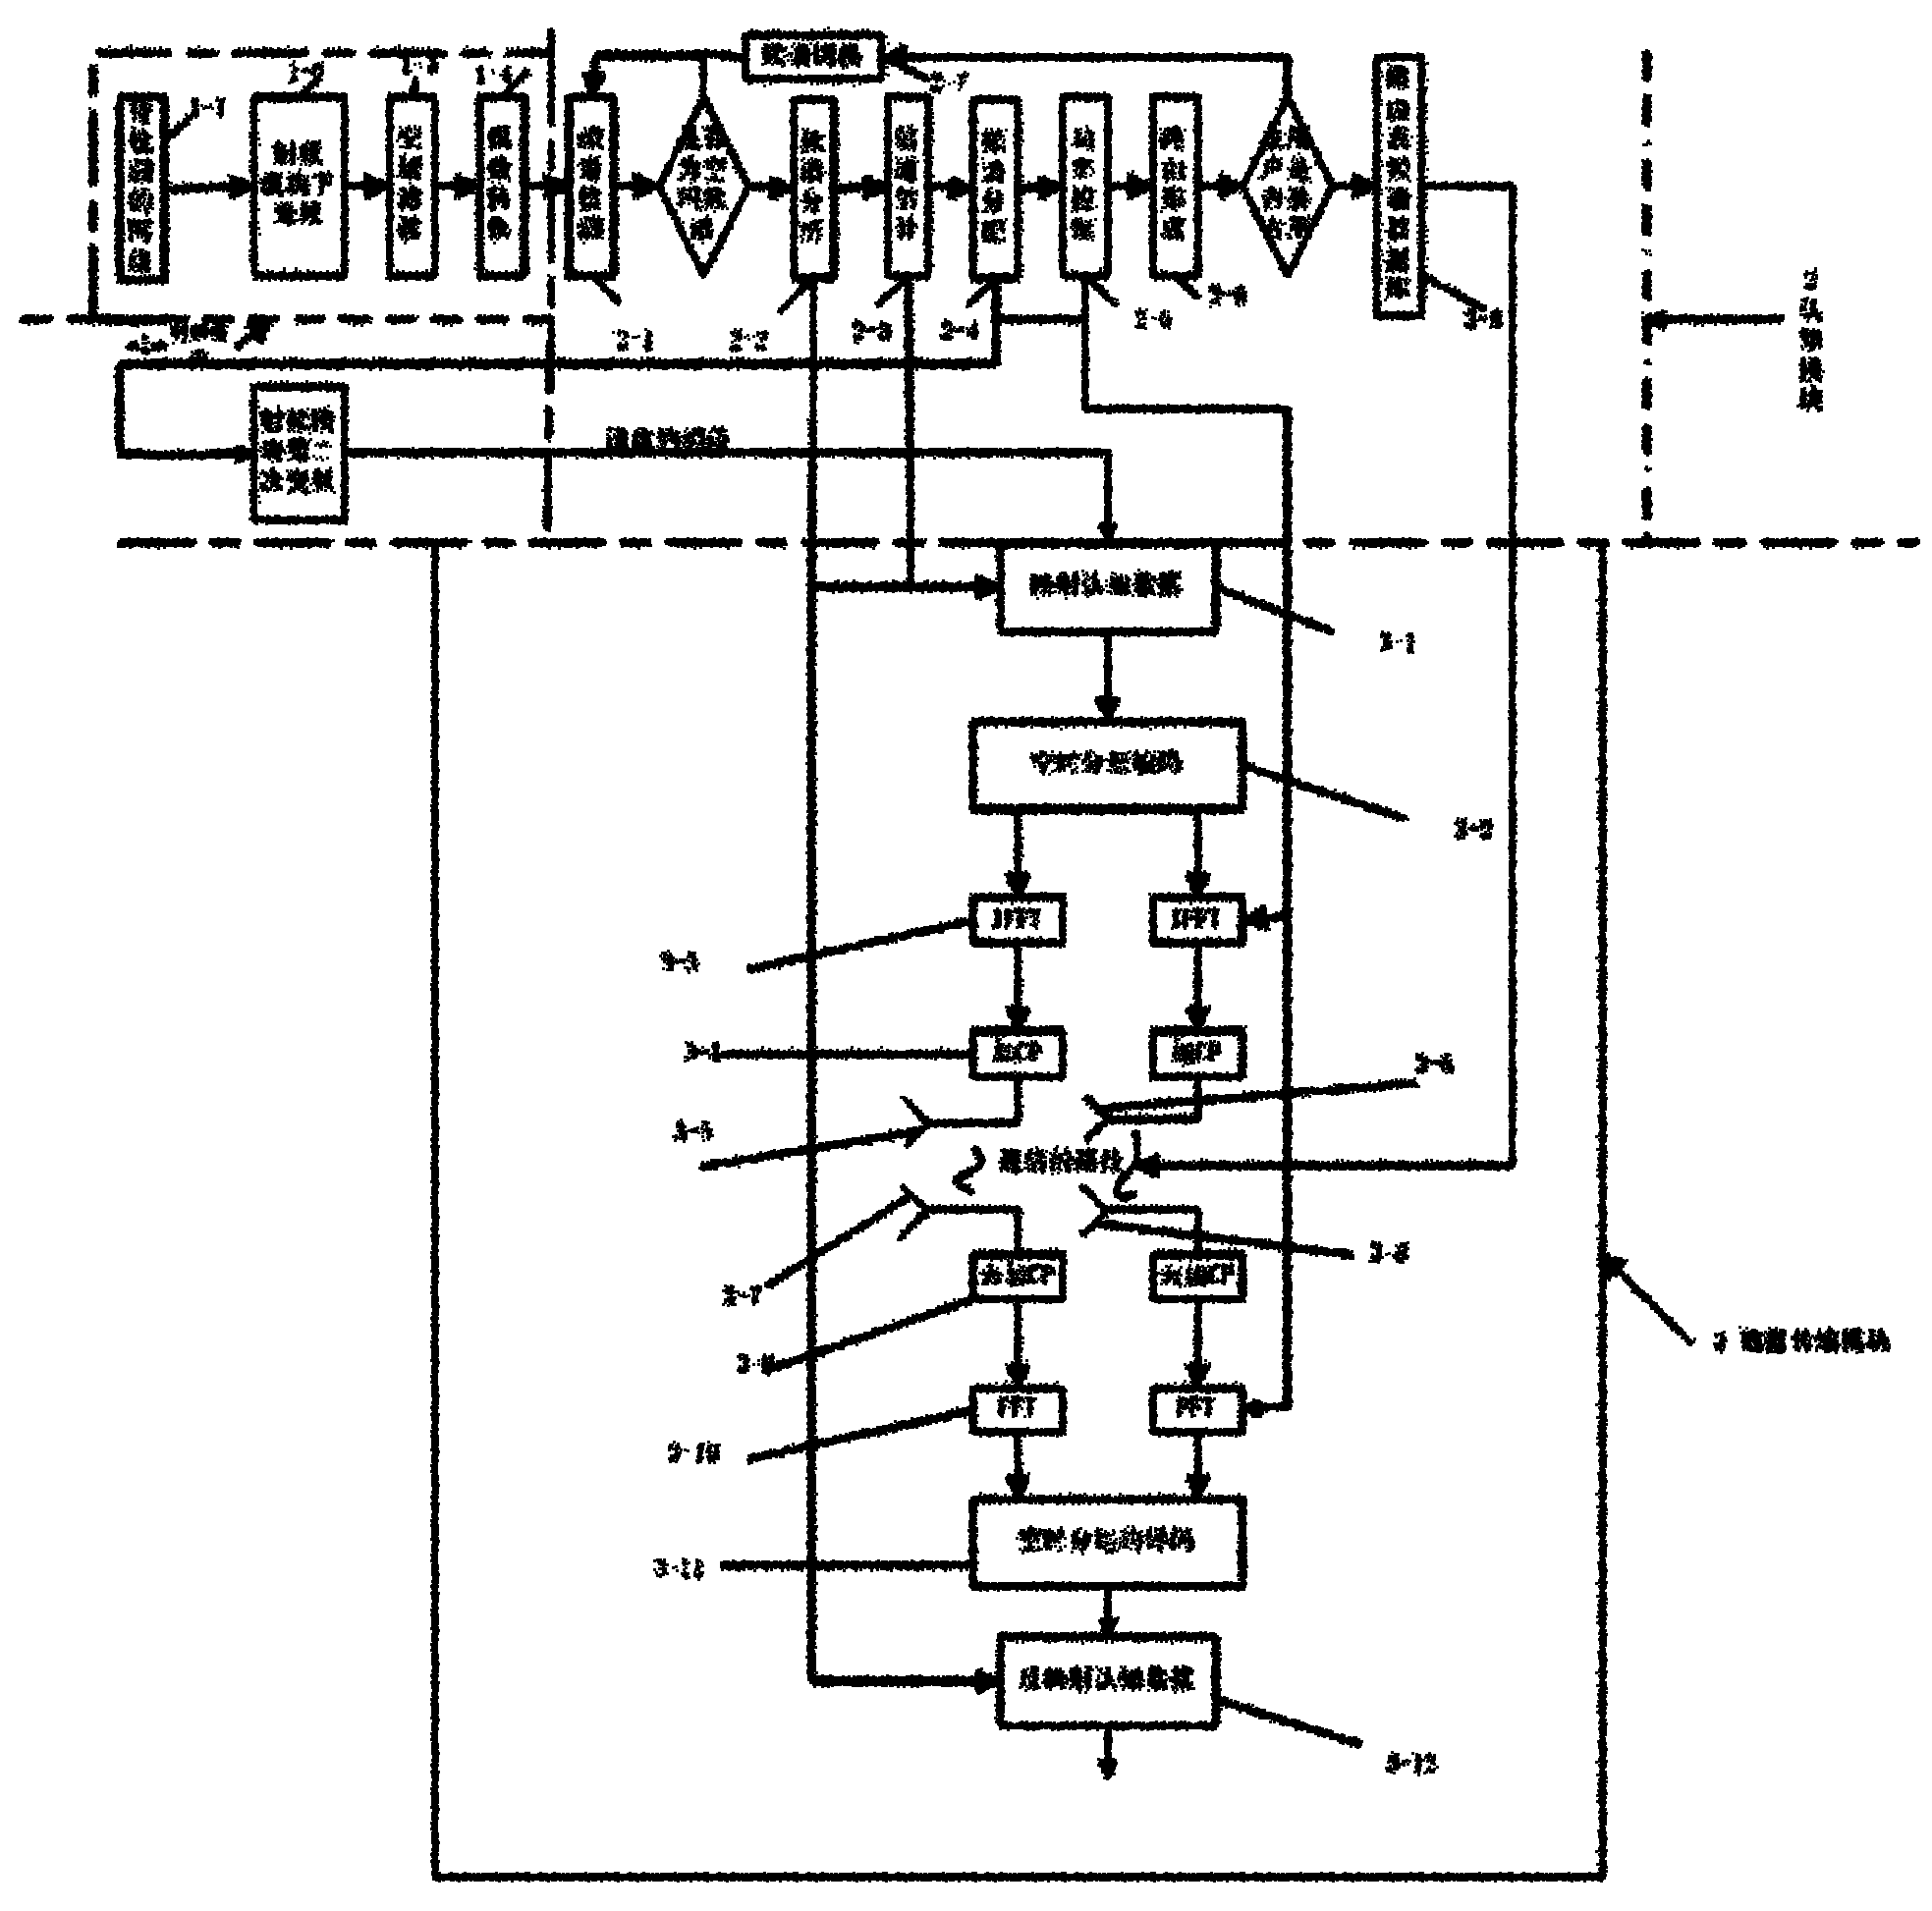 Multiple-input multiple-output (MIMO)-orthogonal frequency division multiplexing (OFDM) cognitive radio communication method